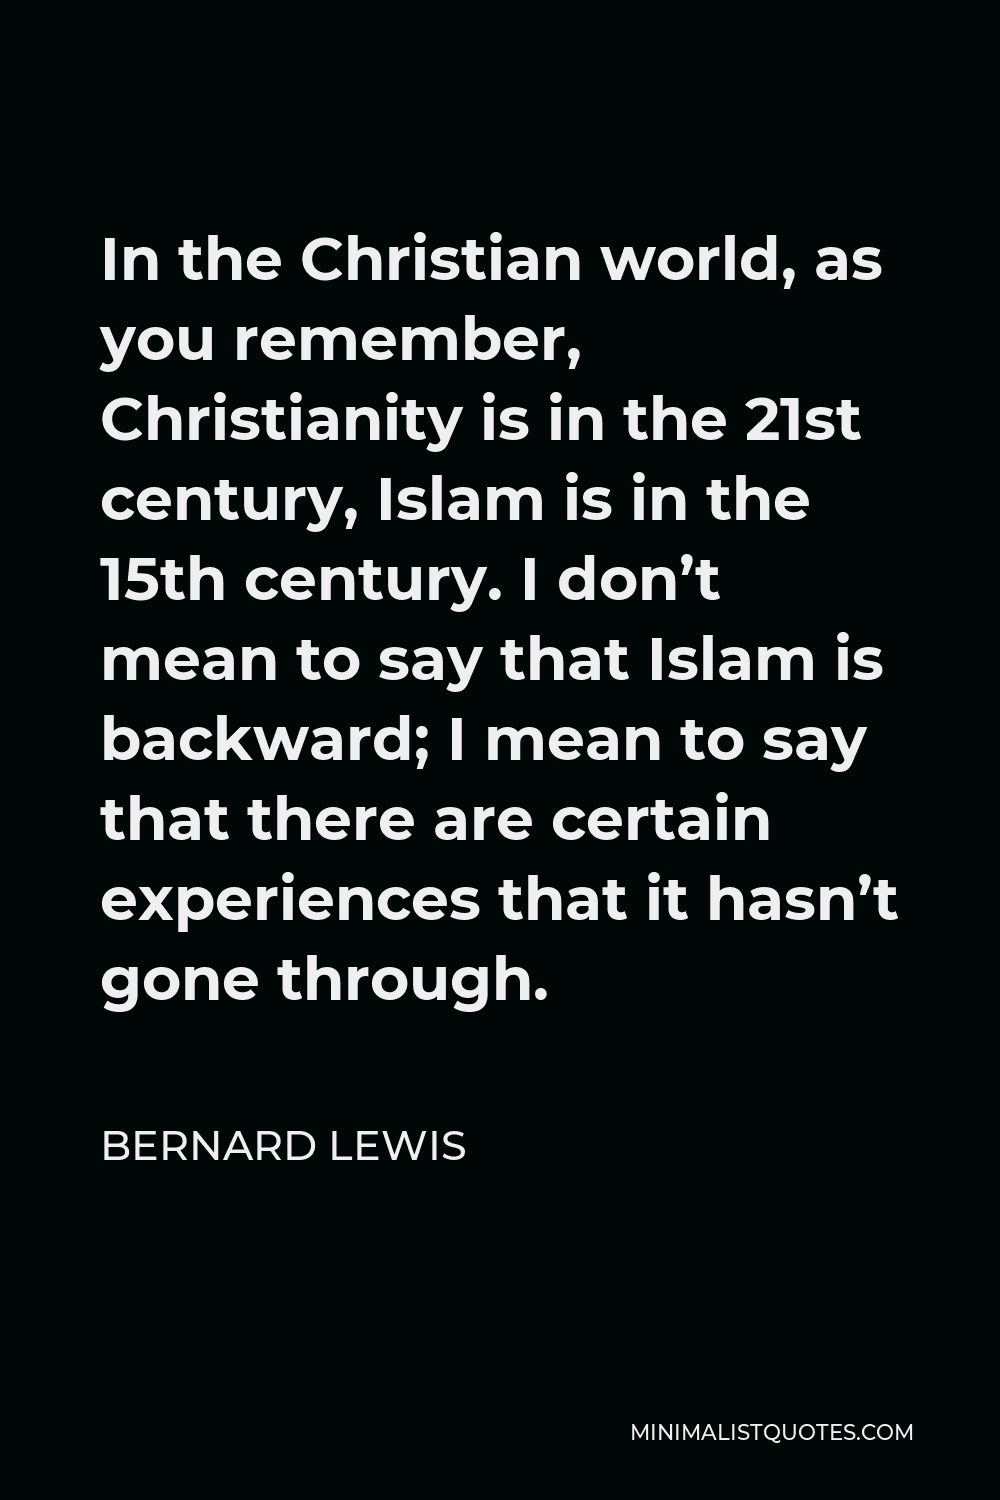 Bernard Lewis Quote - In the Christian world, as you remember, Christianity is in the 21st century, Islam is in the 15th century. I don’t mean to say that Islam is backward; I mean to say that there are certain experiences that it hasn’t gone through.